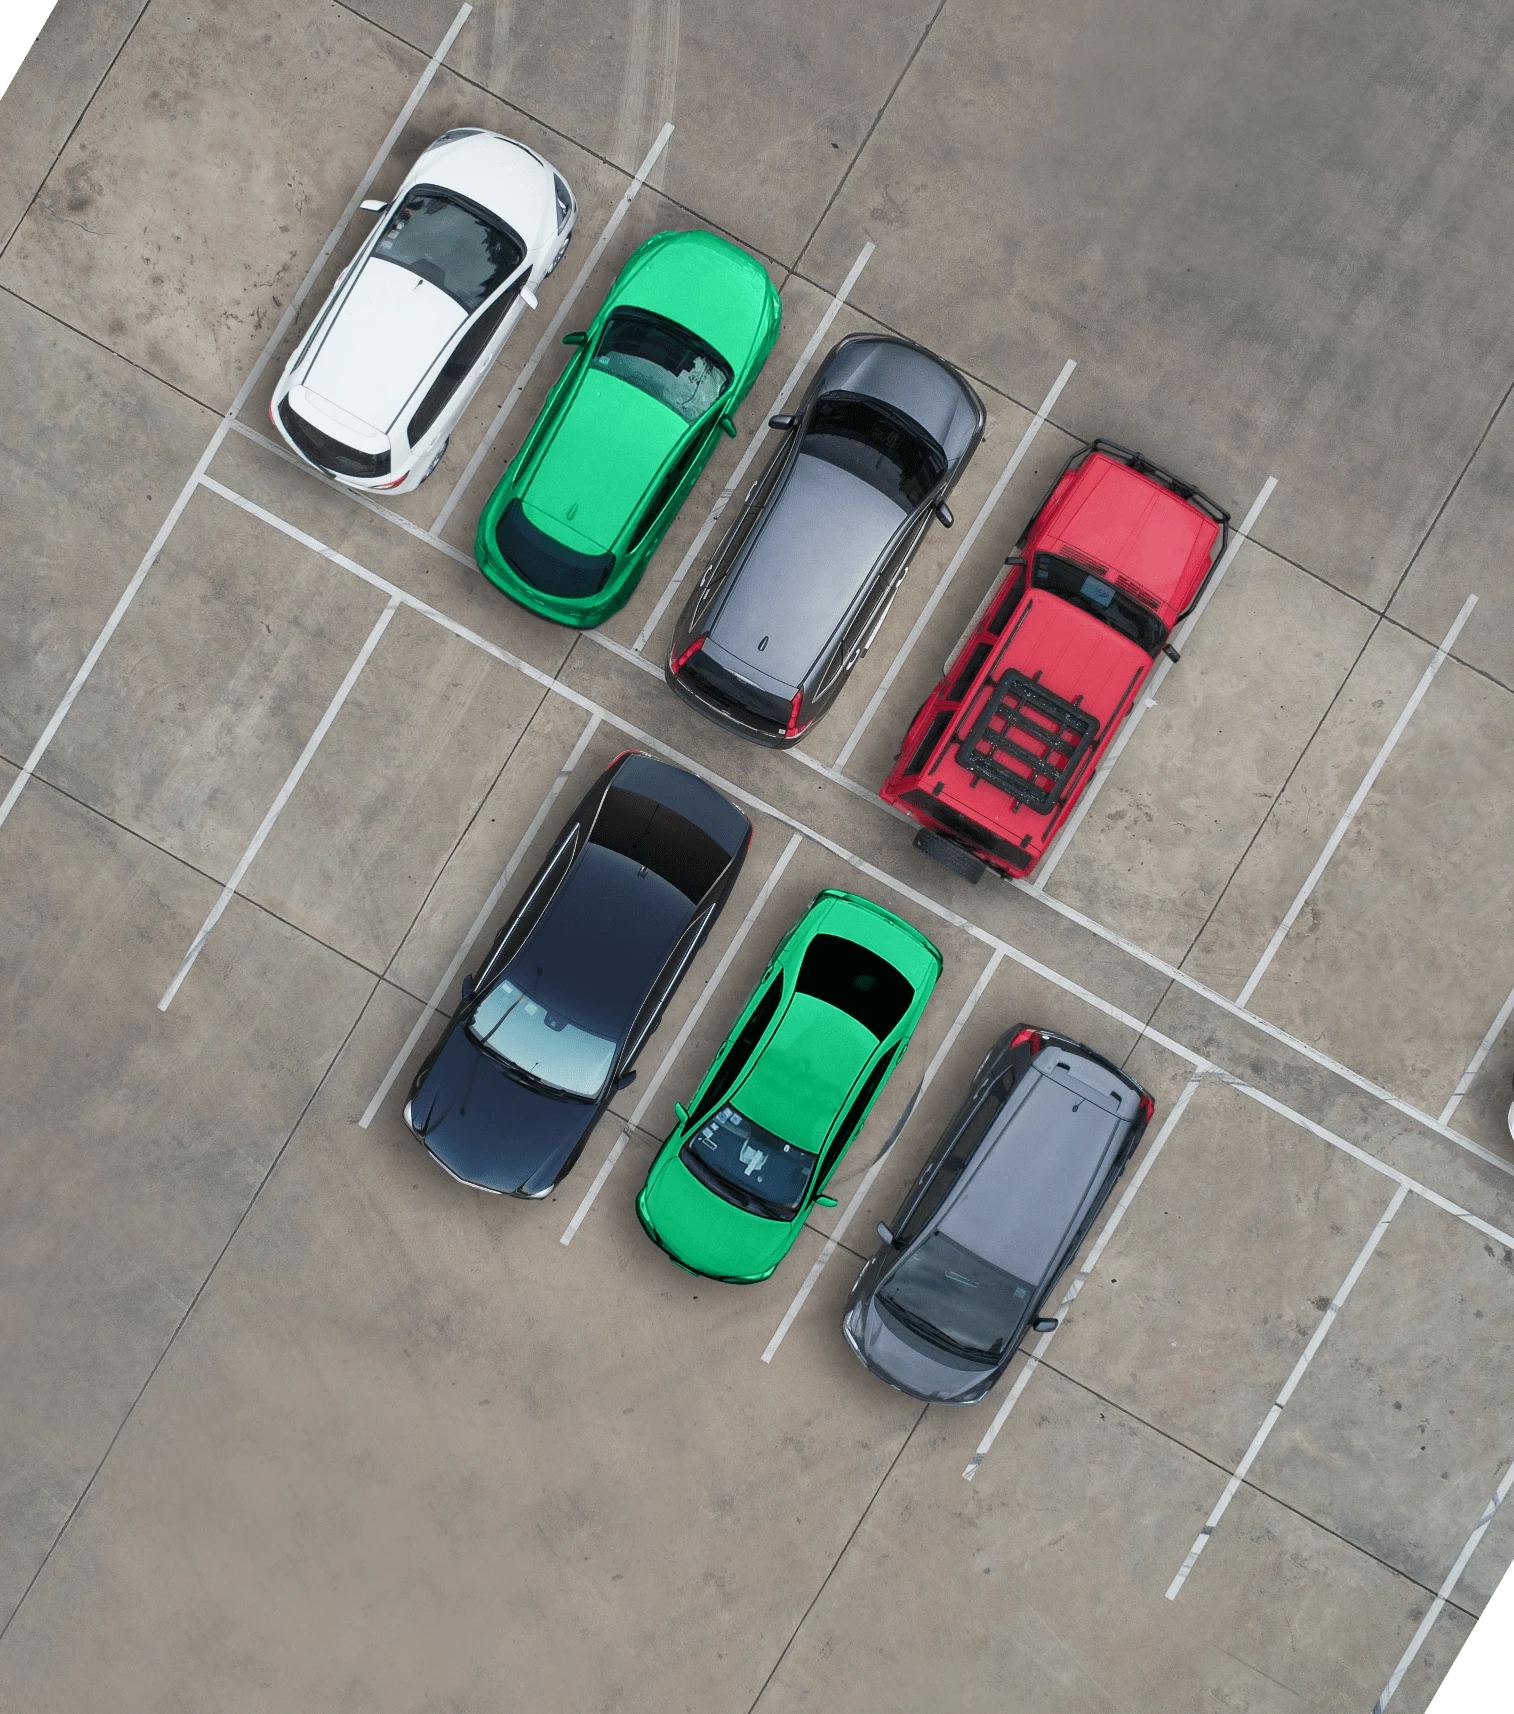 Top view of a parking lot